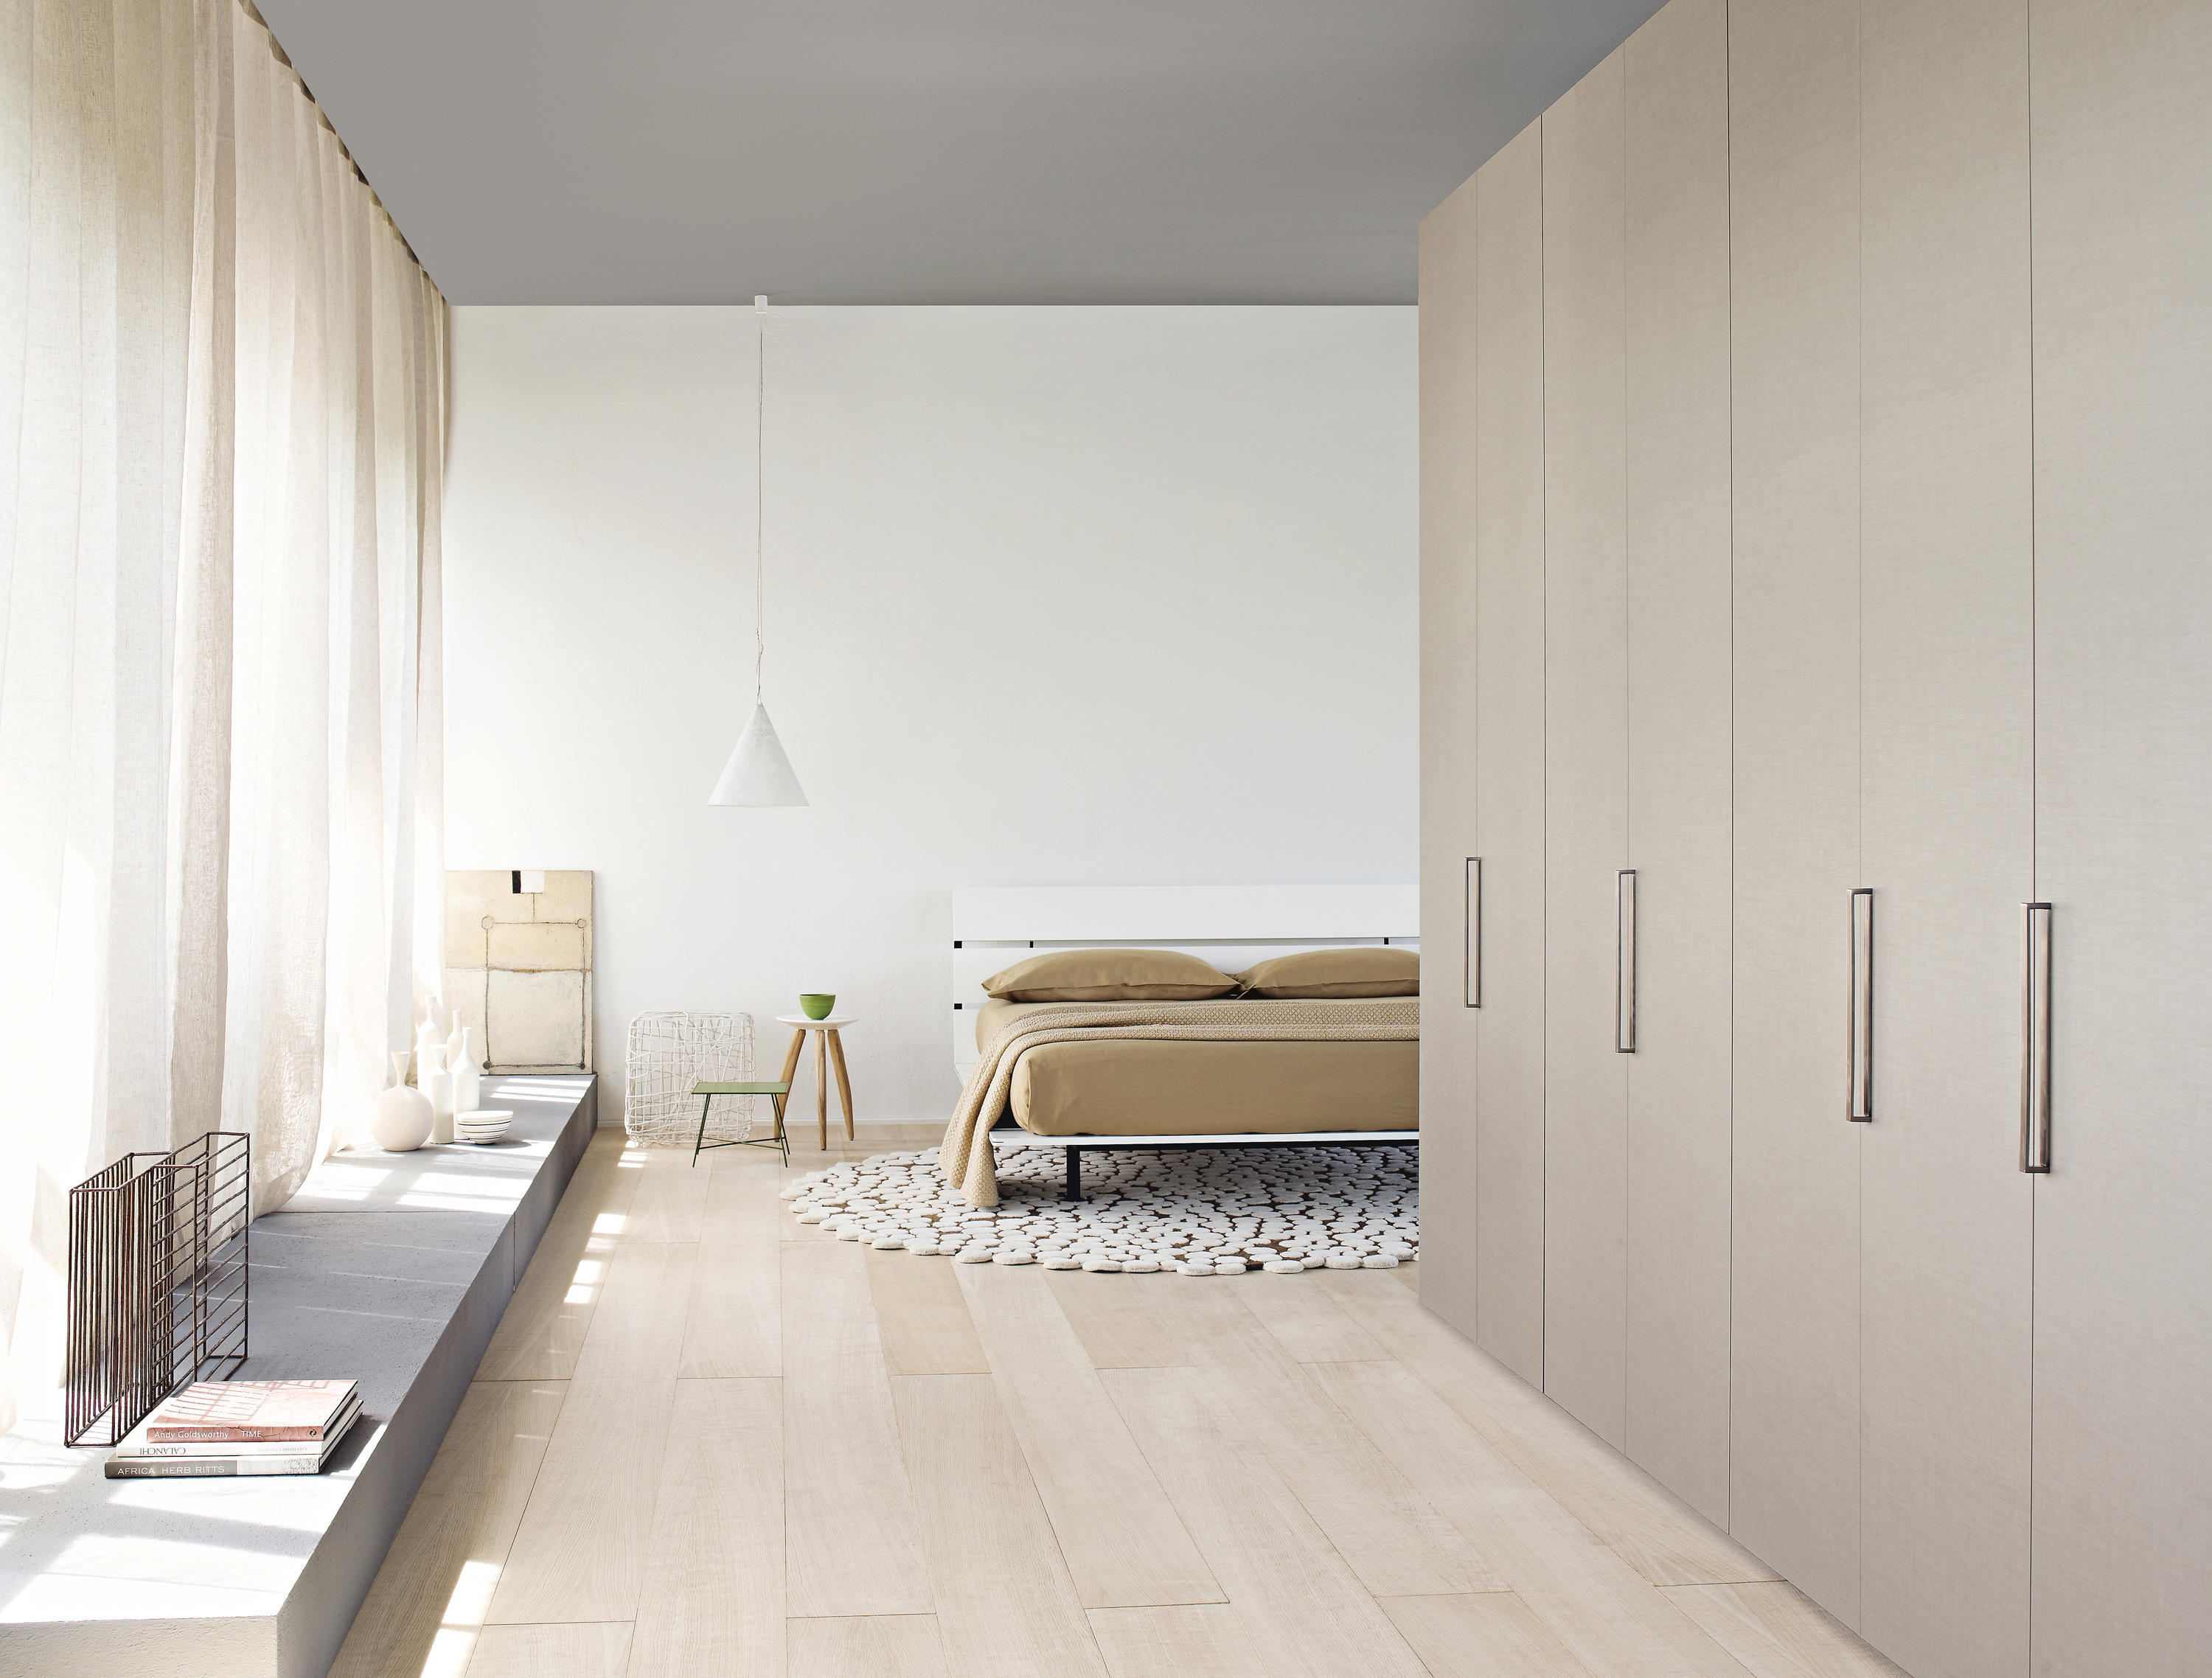 Tadao Double Beds From Flou Architonic